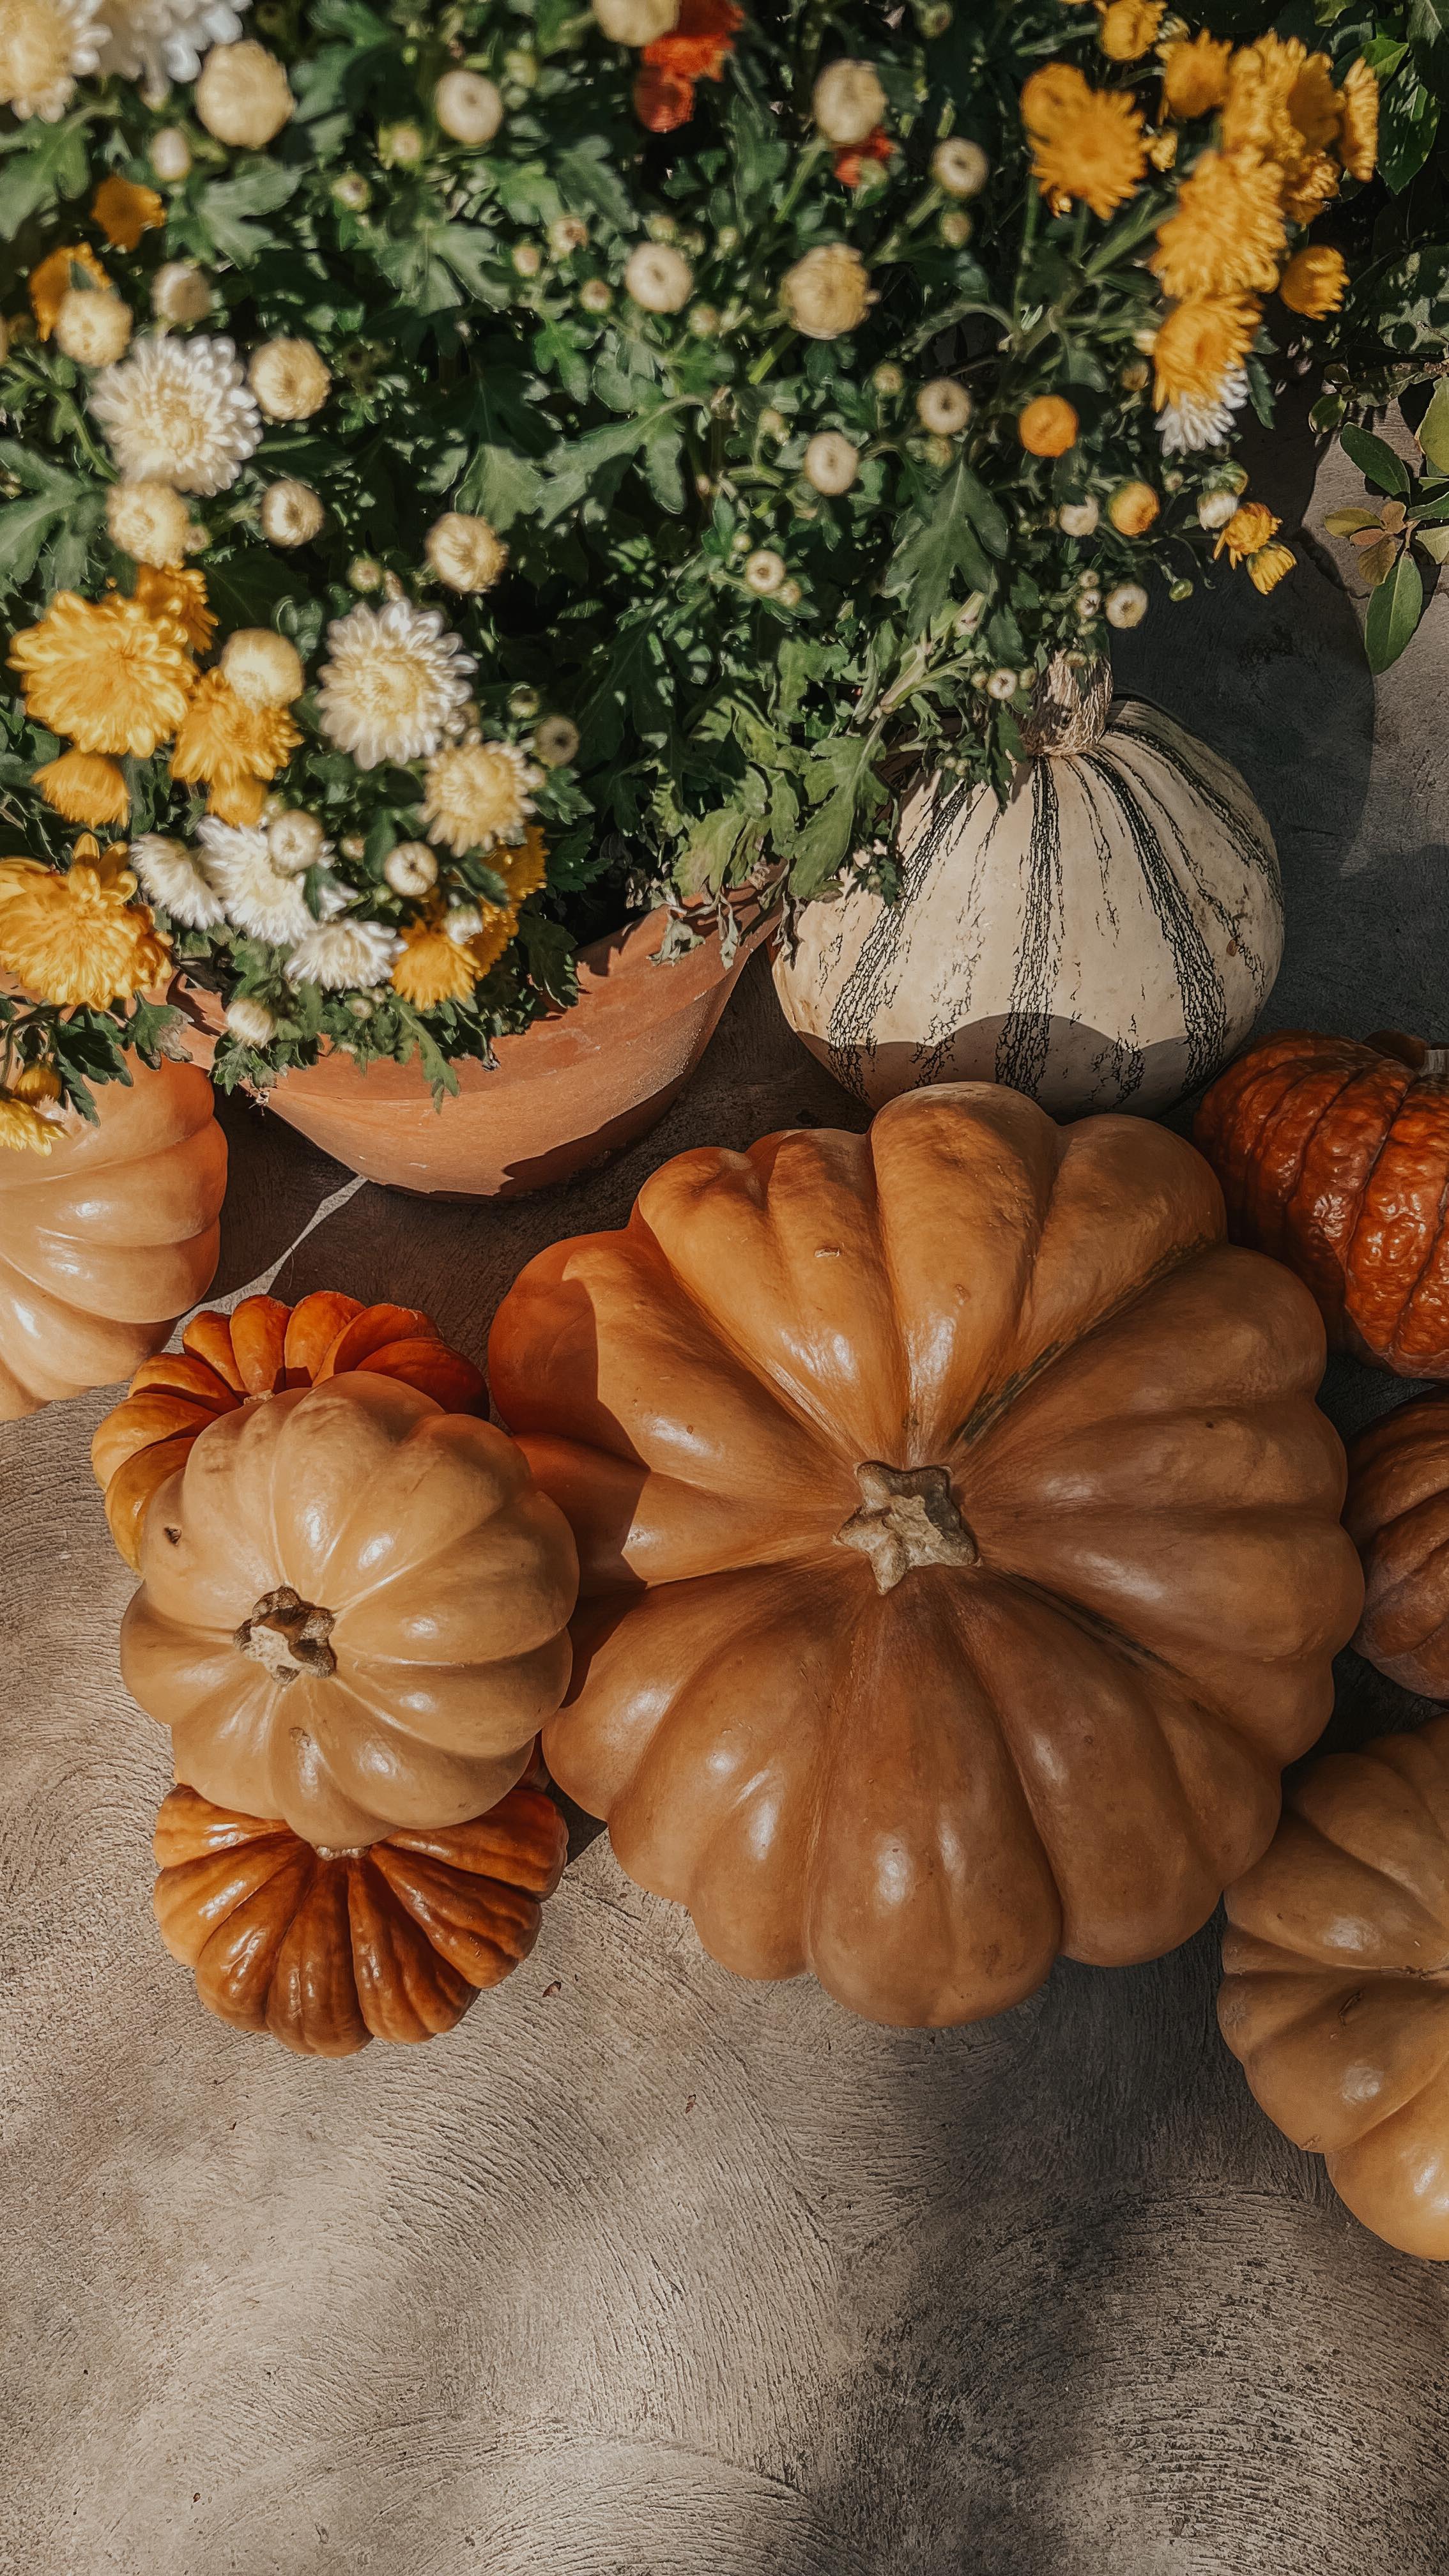 How to preserve those pumpkins all throughout the spooky season!  Do you do the real pumpkin thing or have you gone full faux?  I’m a sucker for the real thing!  Let’s just say I make a million trips to Trader Joe’s October 1st. 🎃
.
.
.
#ᏌᎢㅐøㅆэᏣфㄴᏓєçᎿᏆVеᎾᏣᎿᎭ #howto #pumpkin #fall #october